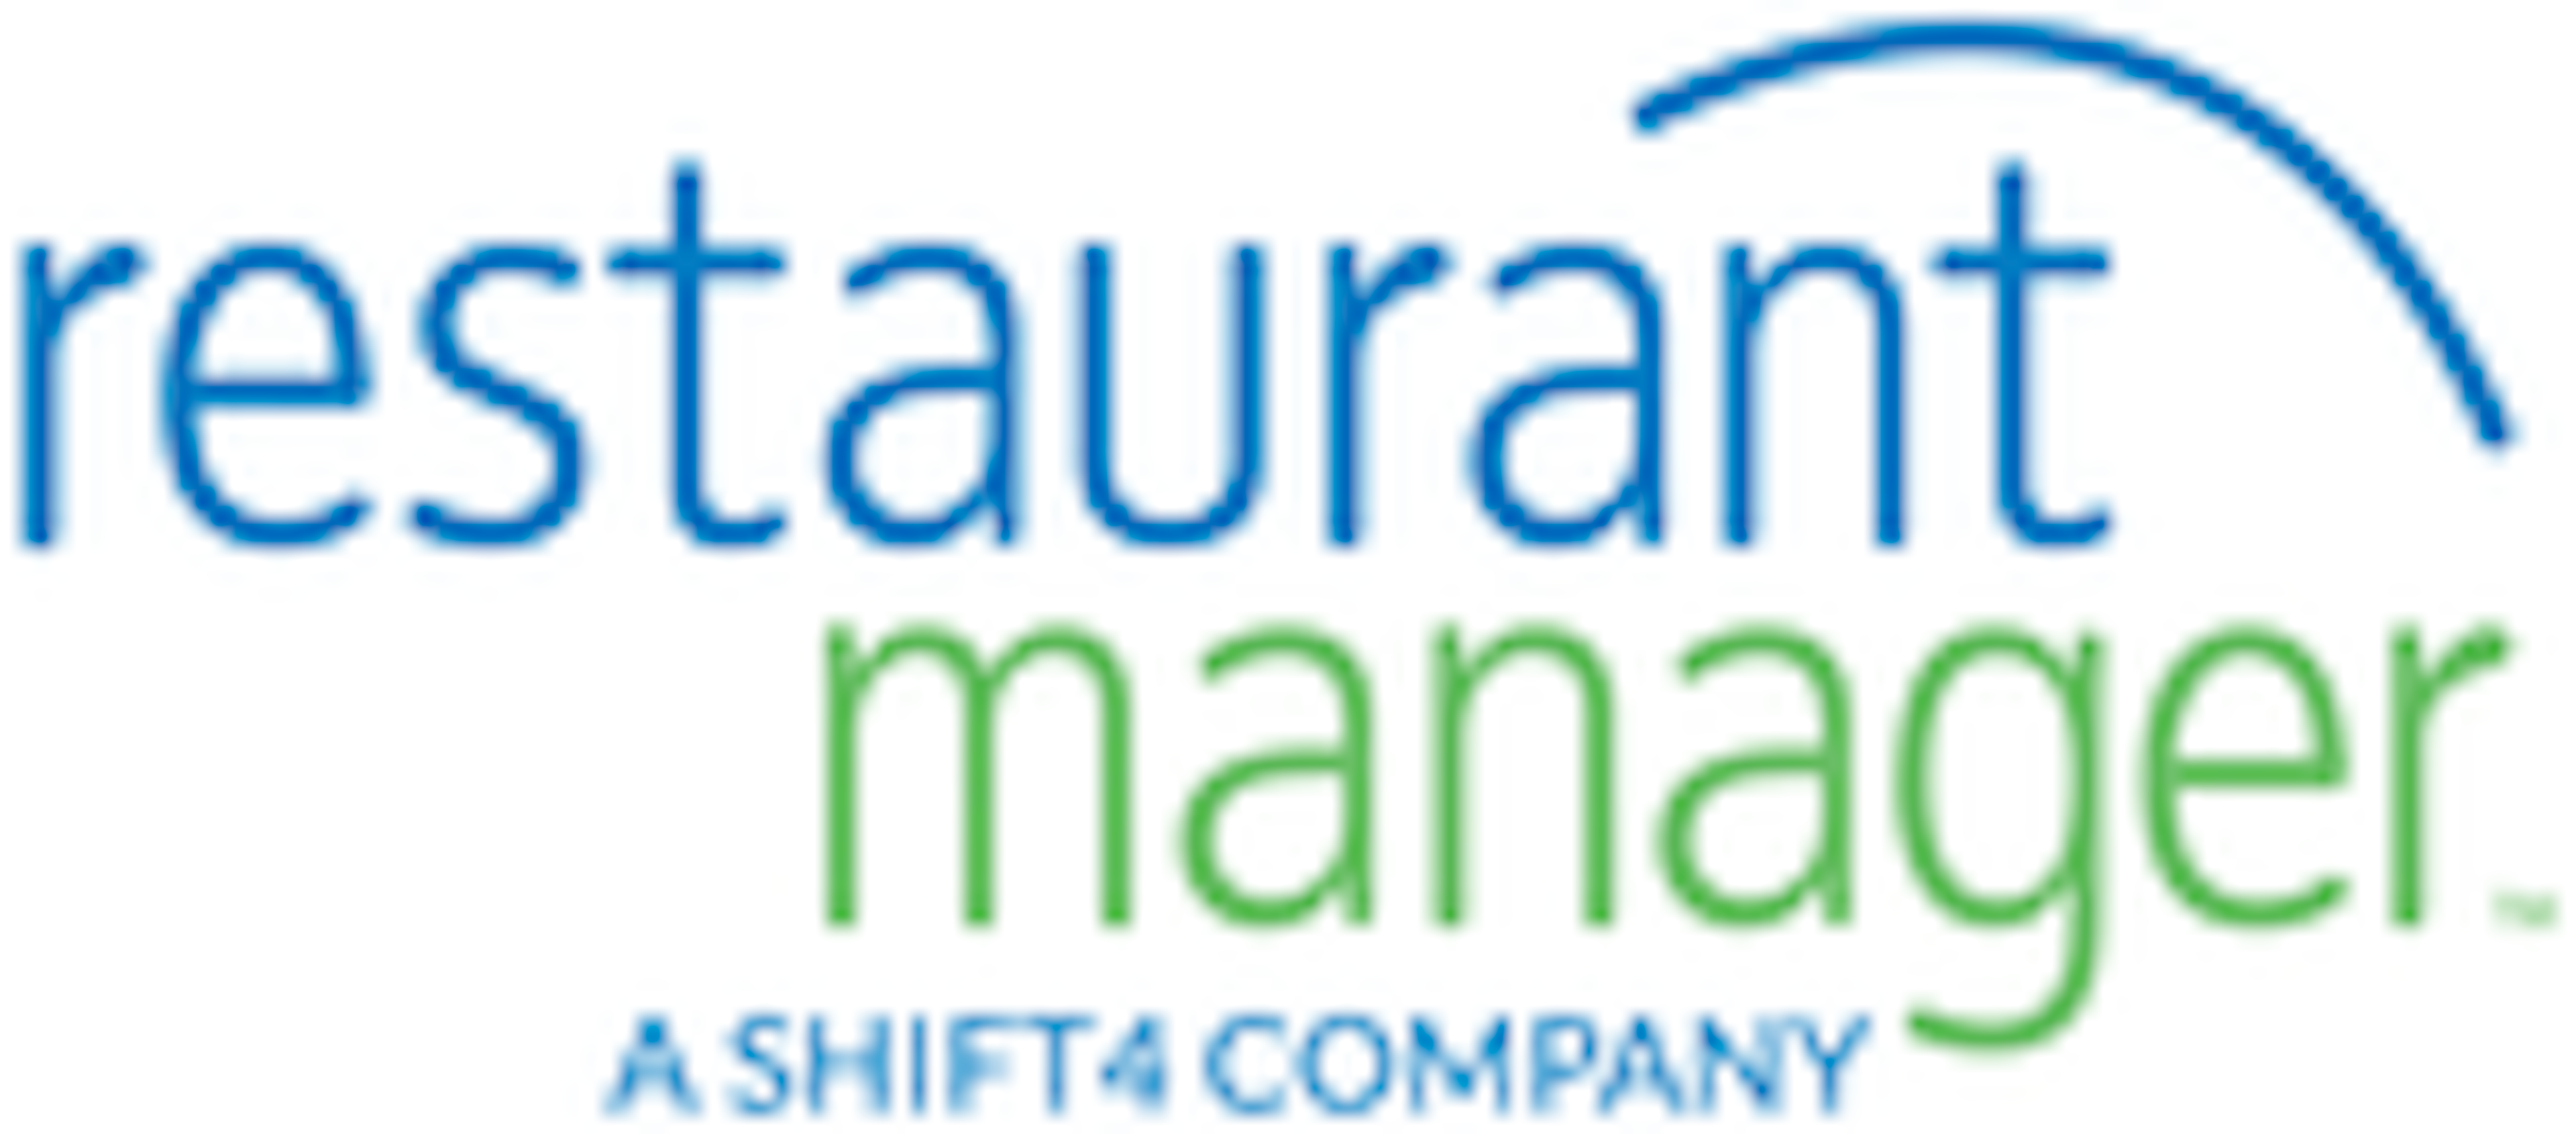 Restaurant Manager by Action Systems Logo